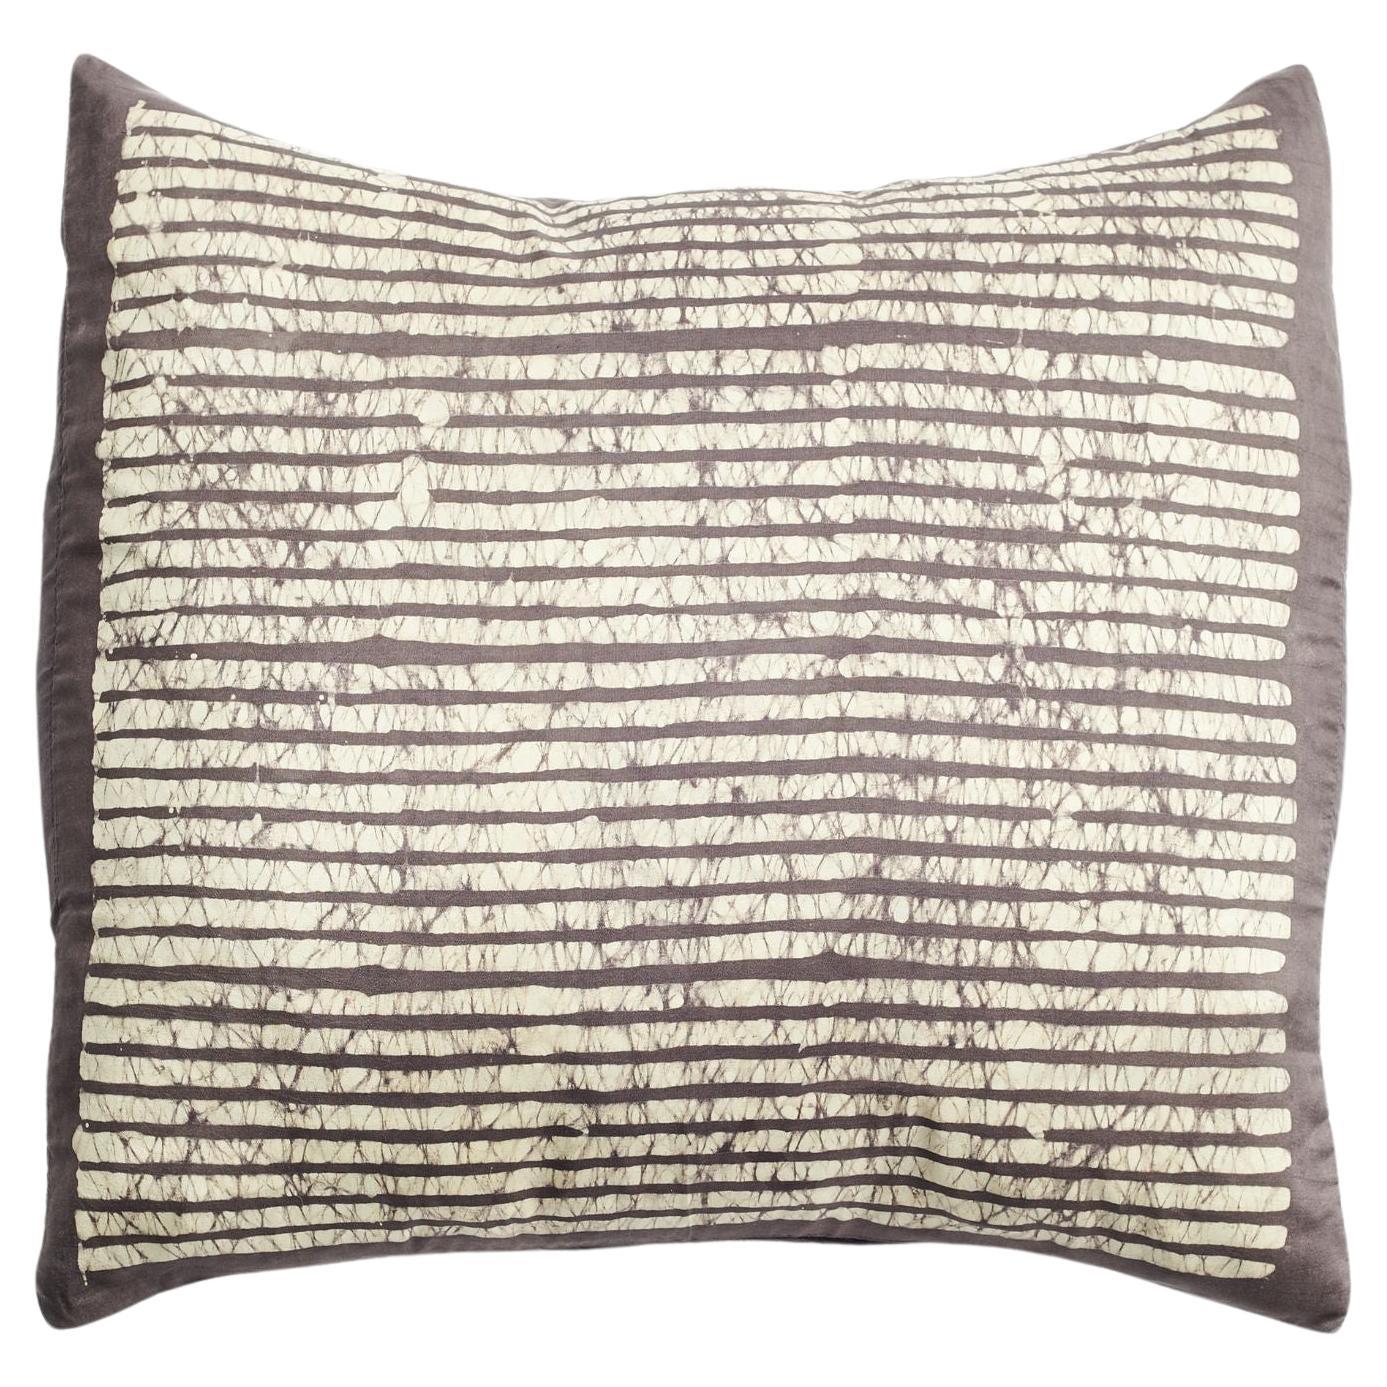 Maple Black Silk Pillow In Stripes Motifs Handcrafted By Artisans  For Sale